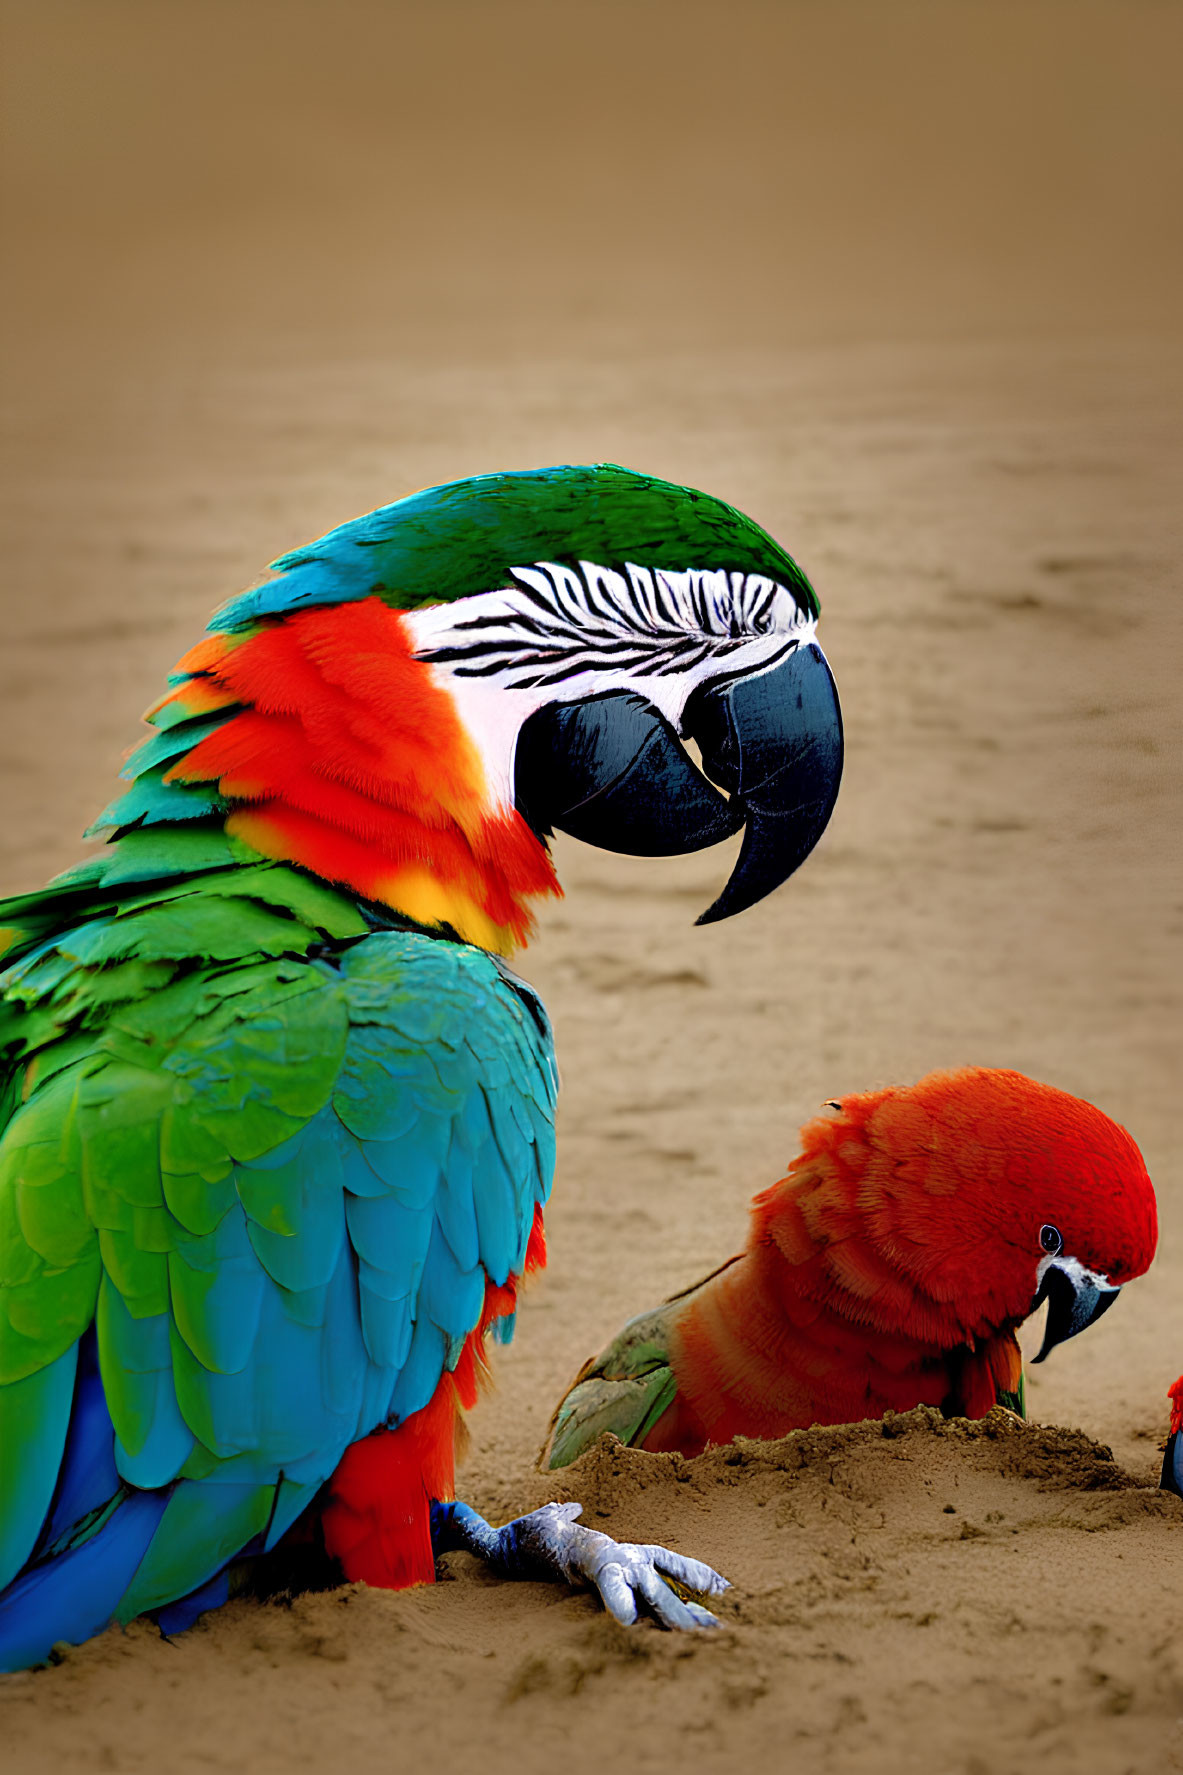 Colorful Parrots Interacting in Soft Background